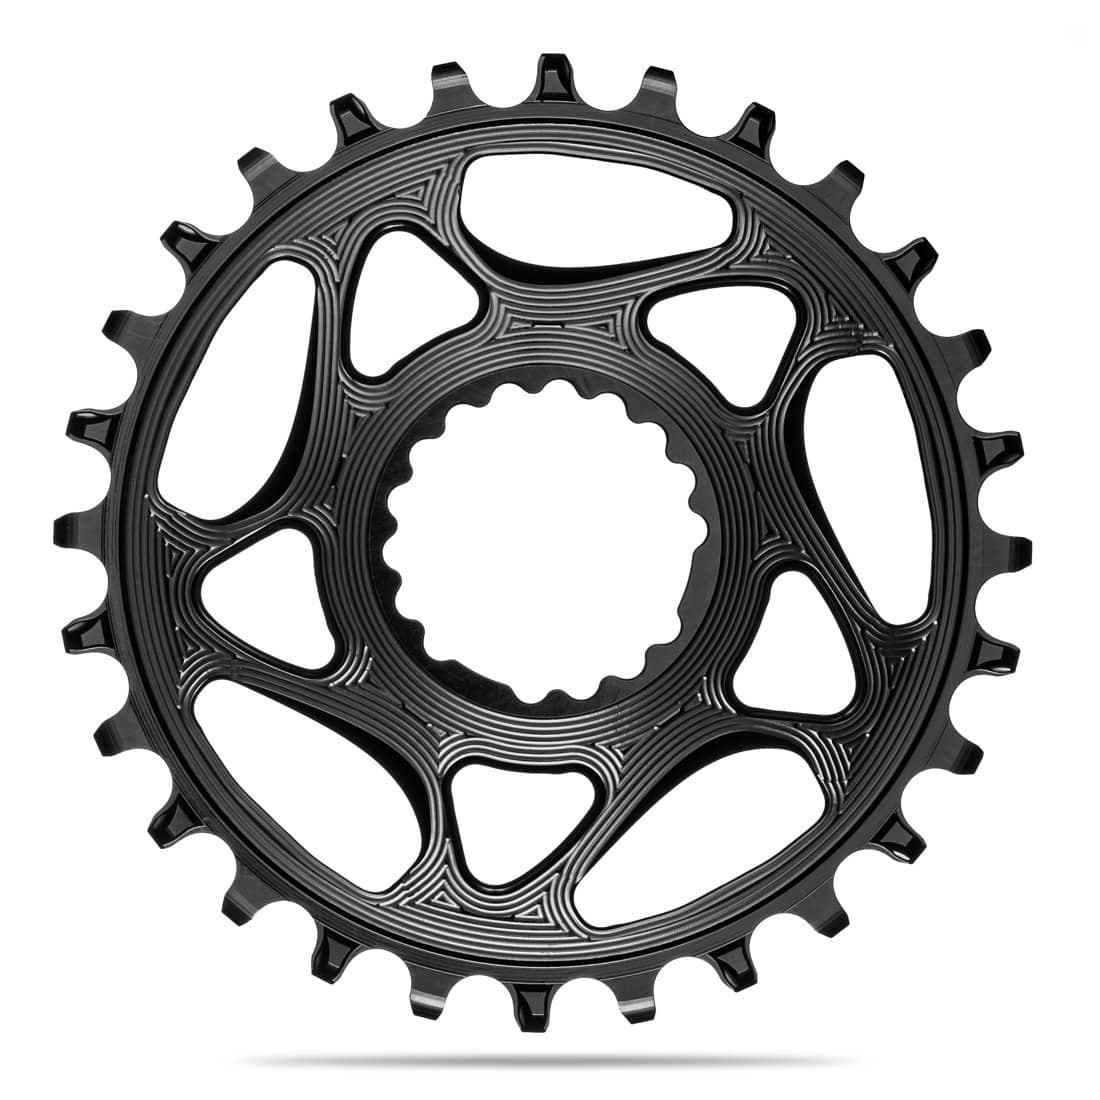 absoluteblack narrow wide direct mount chainring for Cannondale hollowgram sisl fsi